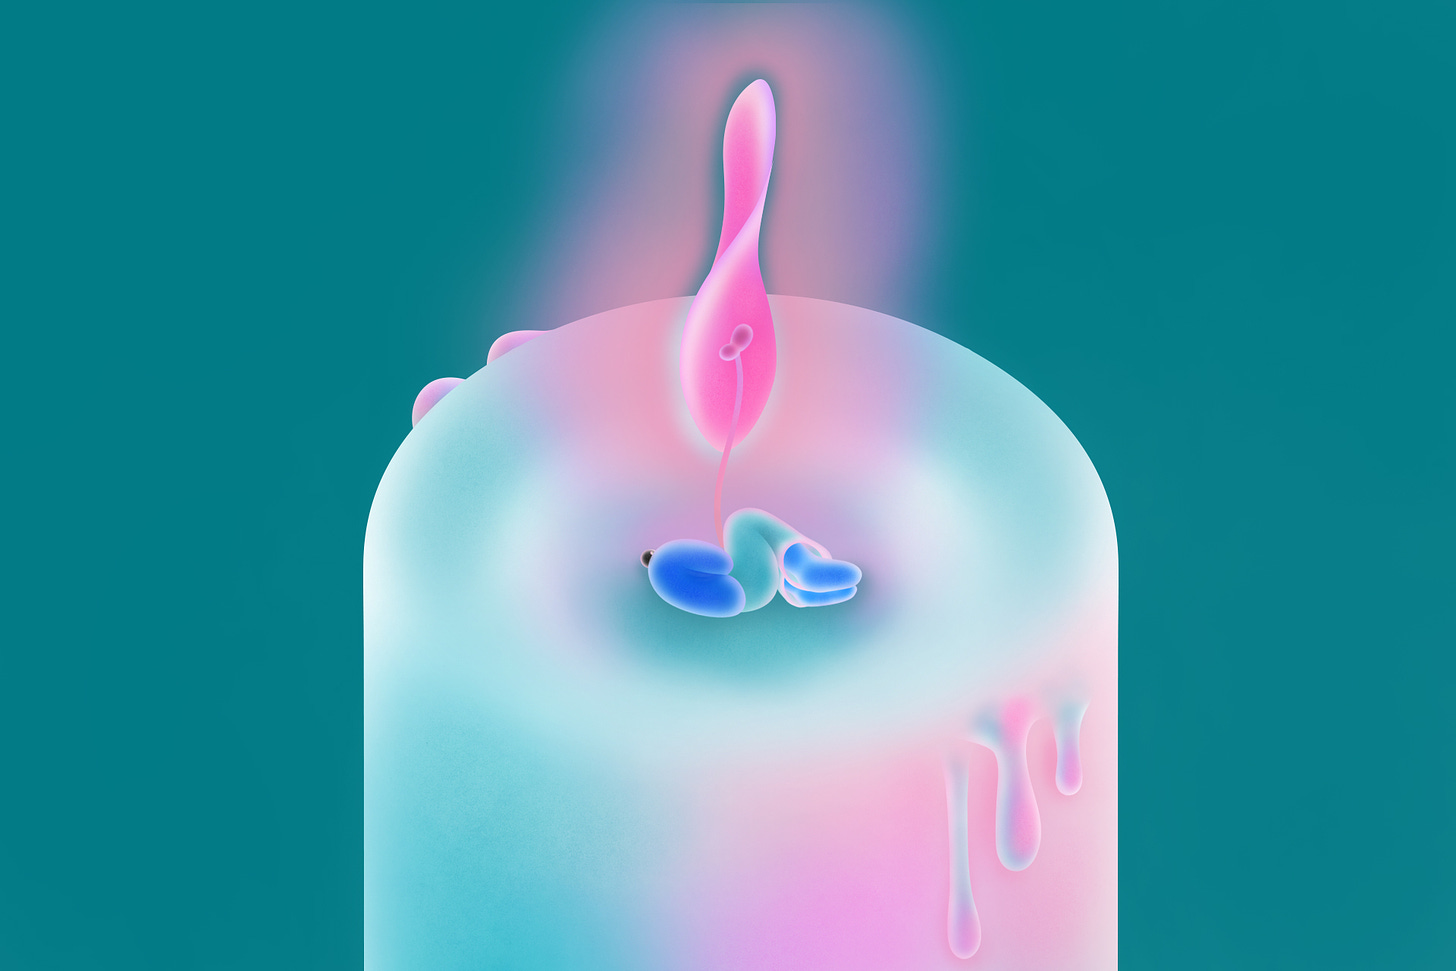 An illustration shows a person curled up around a giant candle’s glowing pink flame.